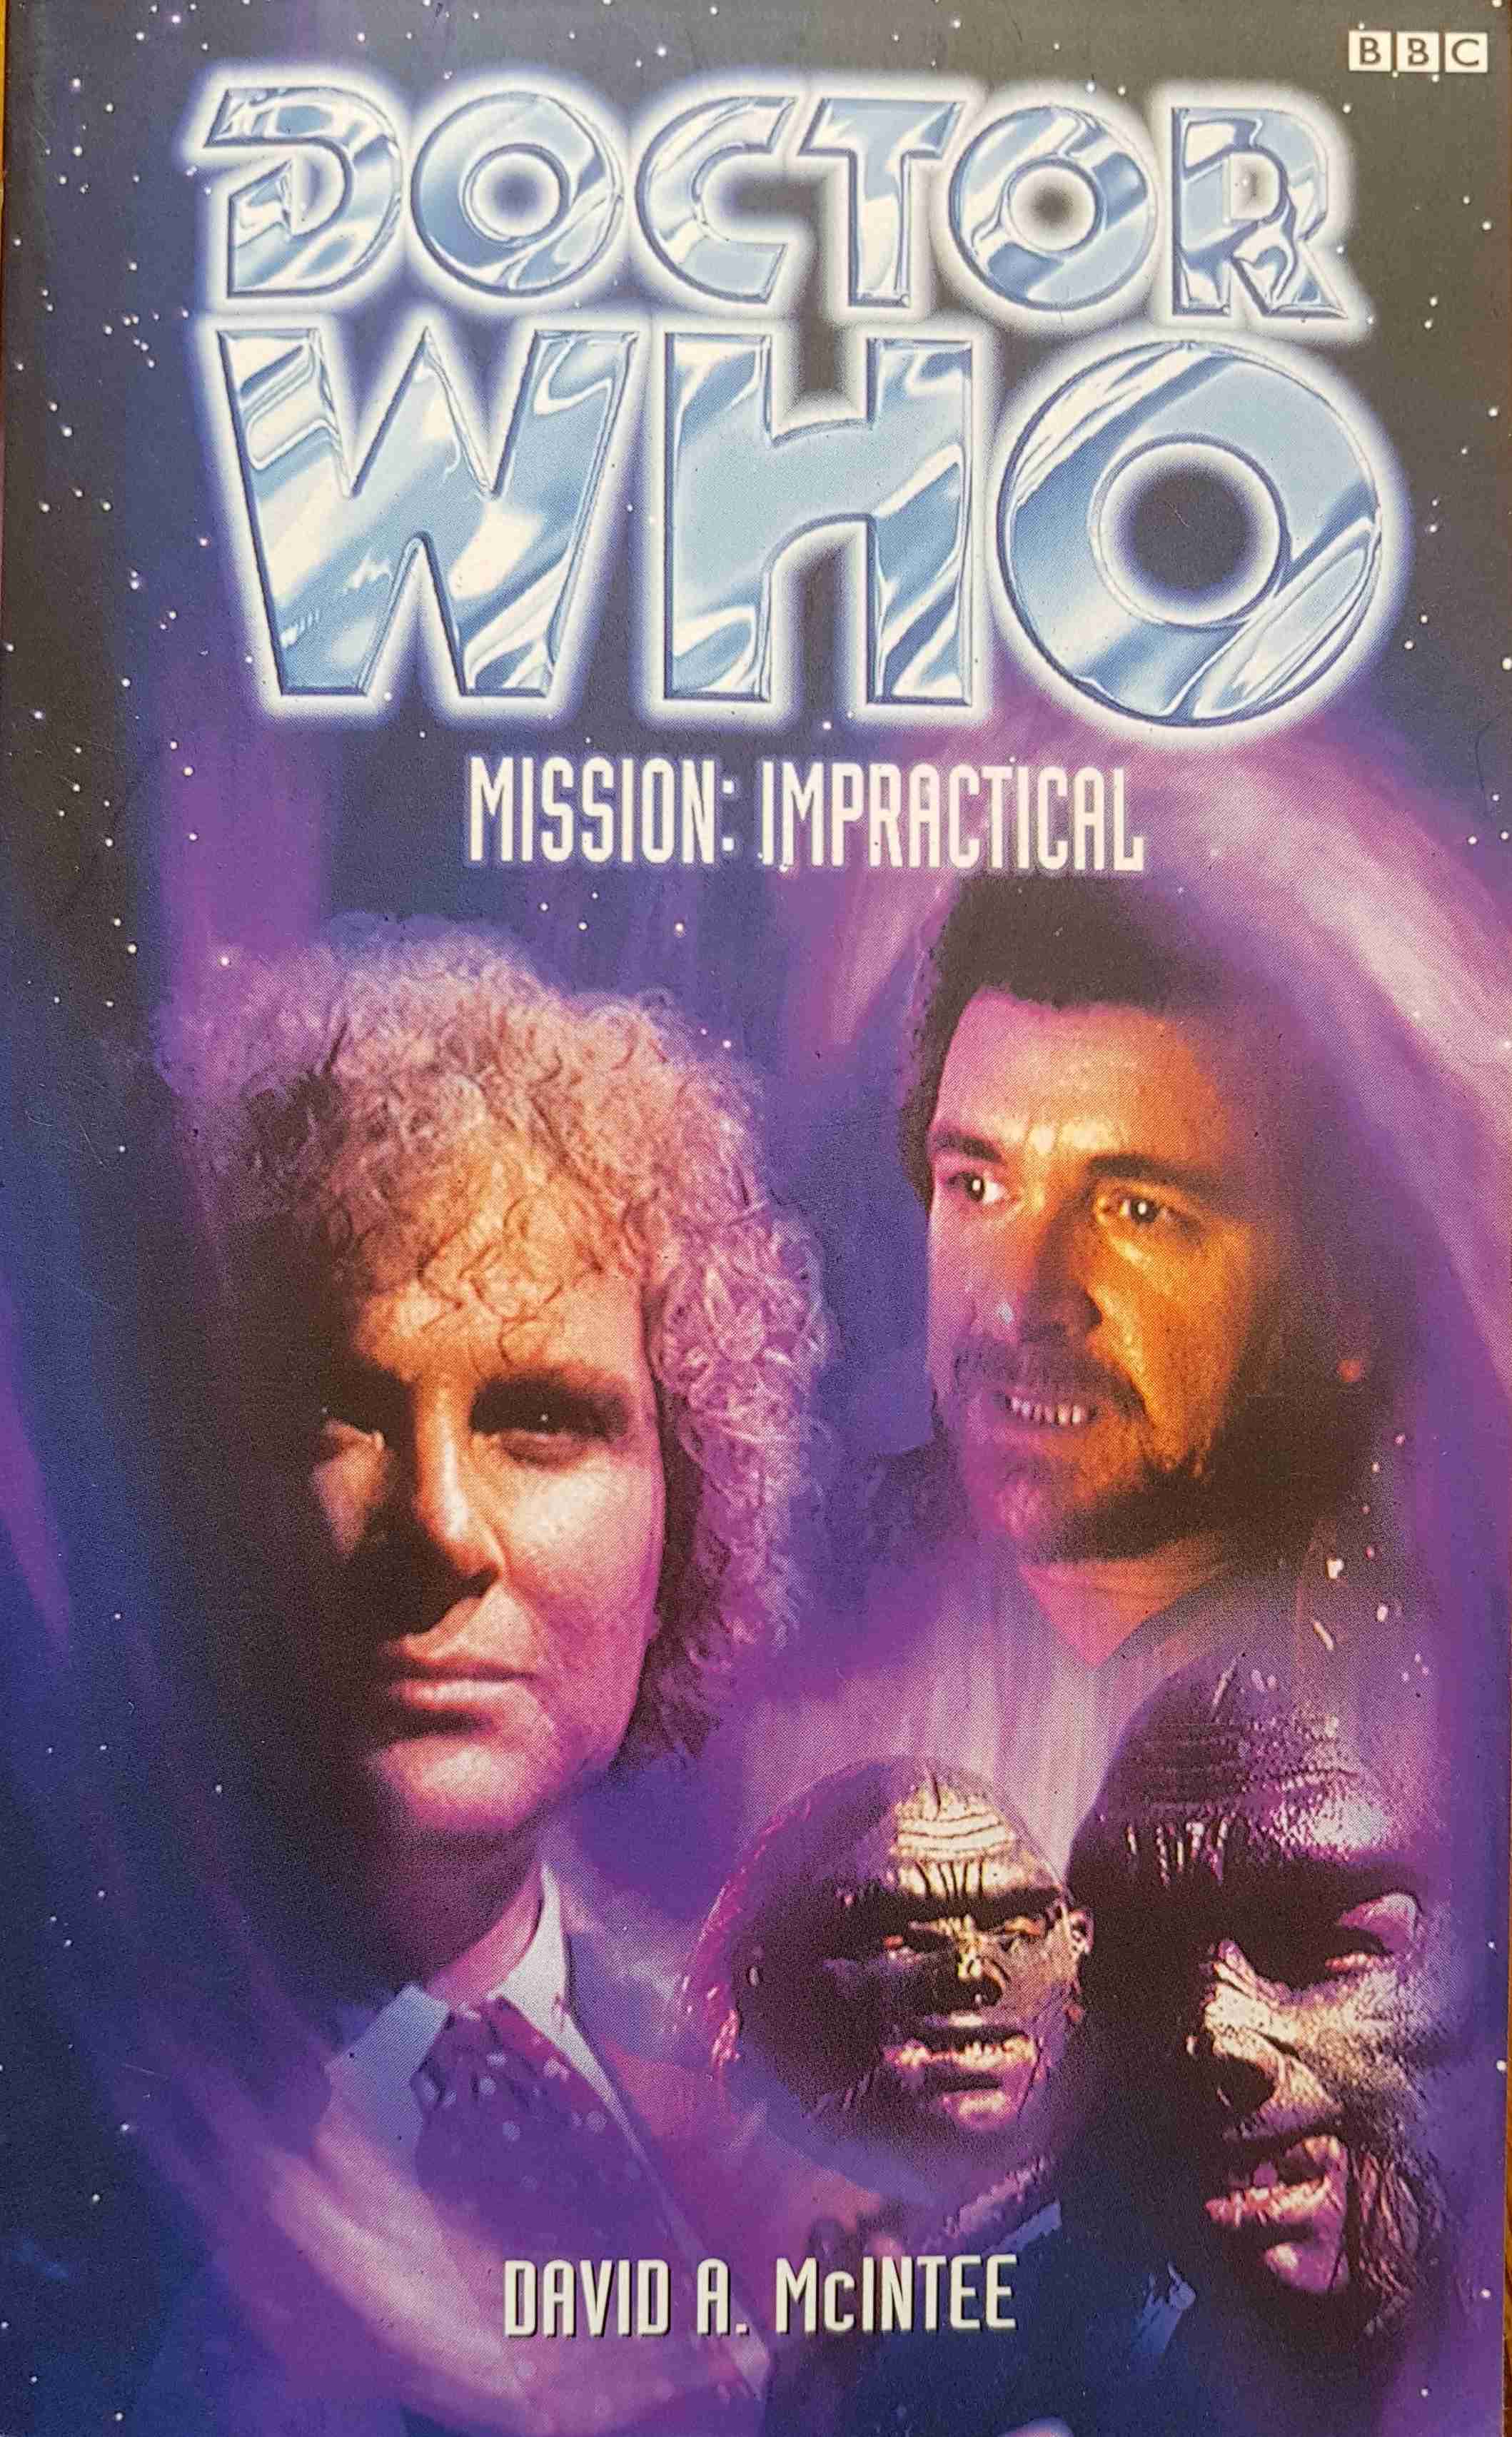 Picture of 0-563-40592-9 Doctor Who - Mission: Impractical by artist David A. McIntee from the BBC records and Tapes library